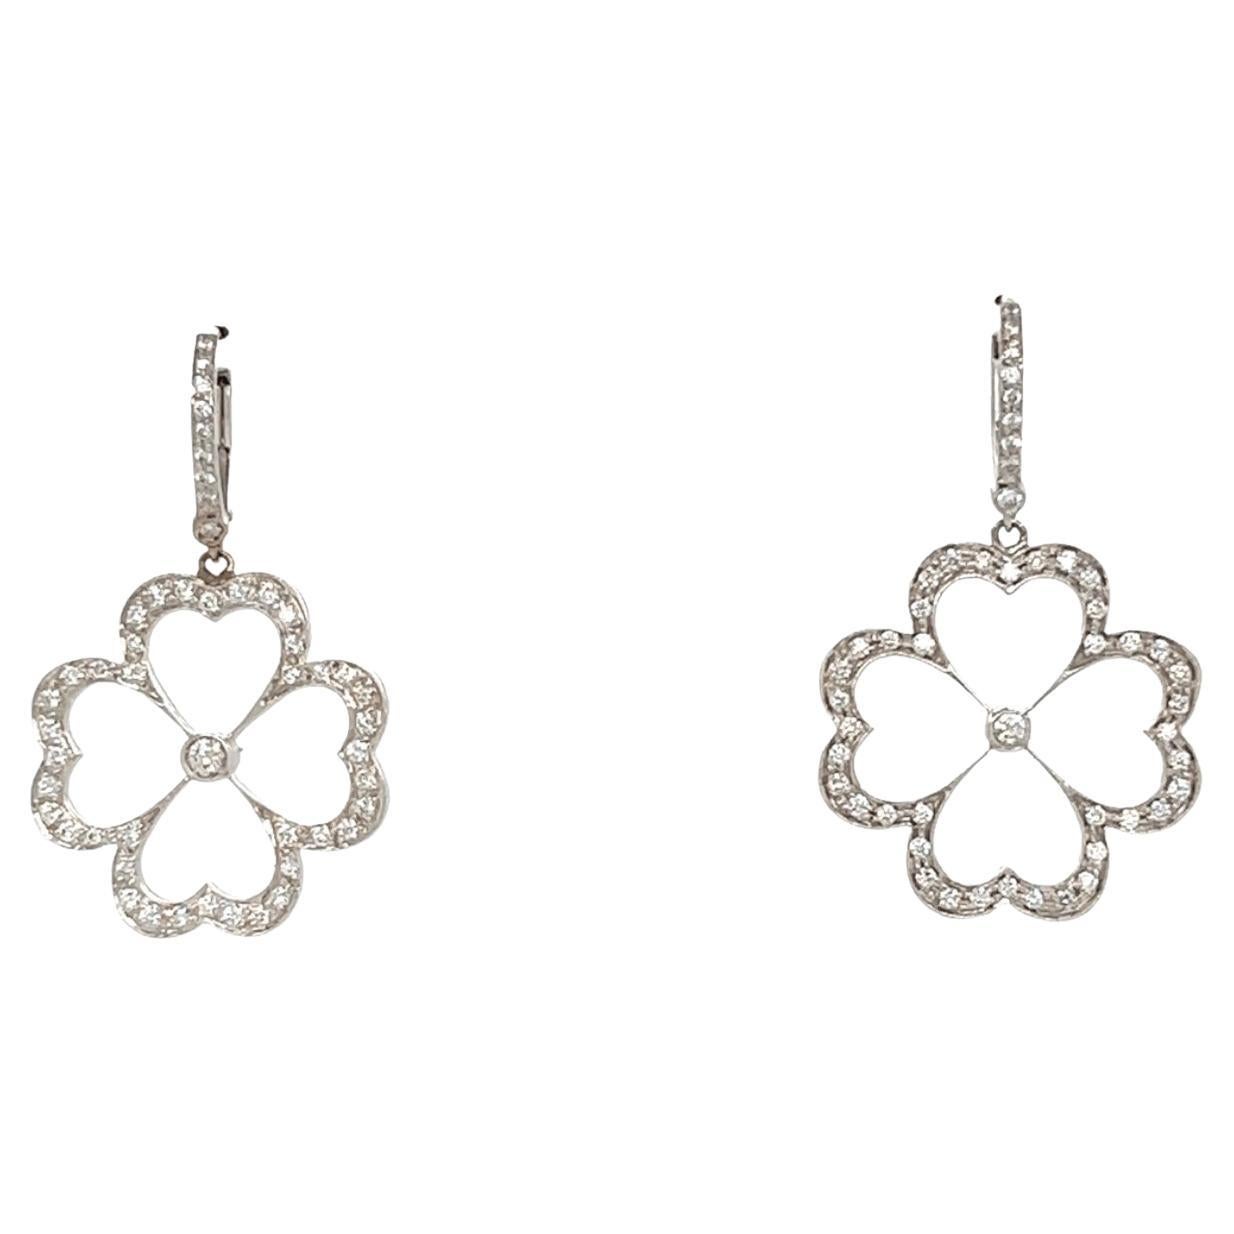 Sophisticated Shamrock Pave 1.0 Ctw Diamond Four Leaf Clover Earrings For Sale